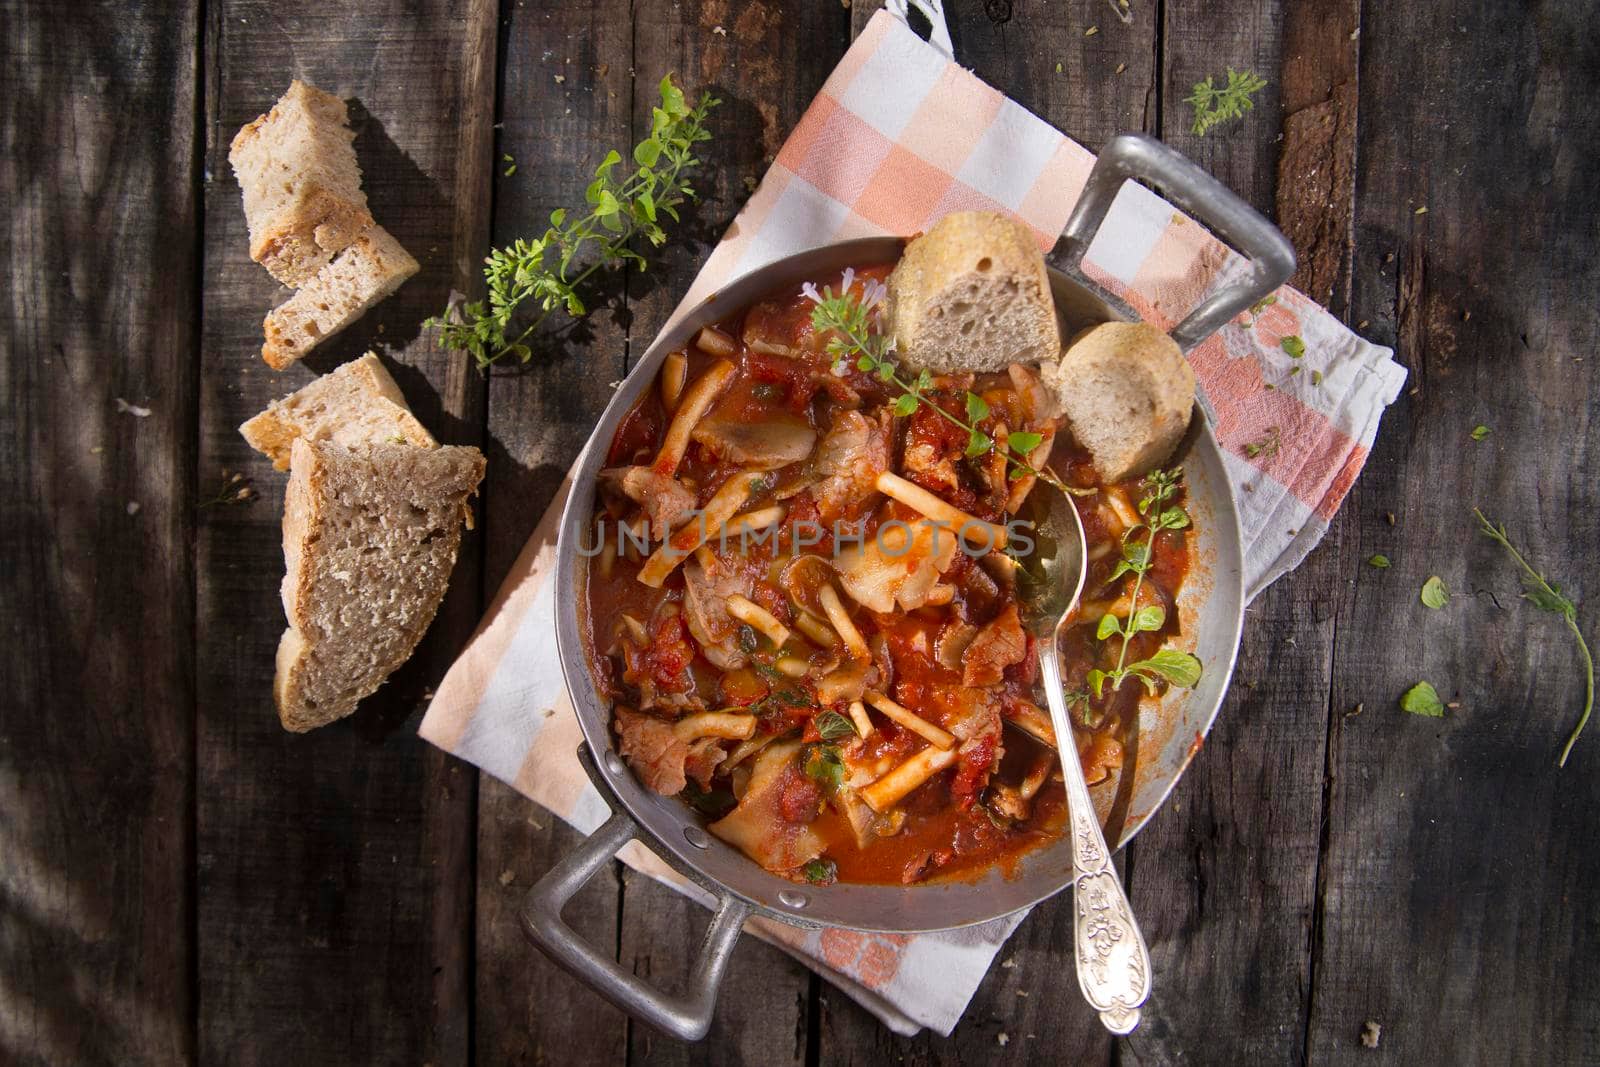 Presentation of a dish with mushrooms pioppini stewed with tomatoes